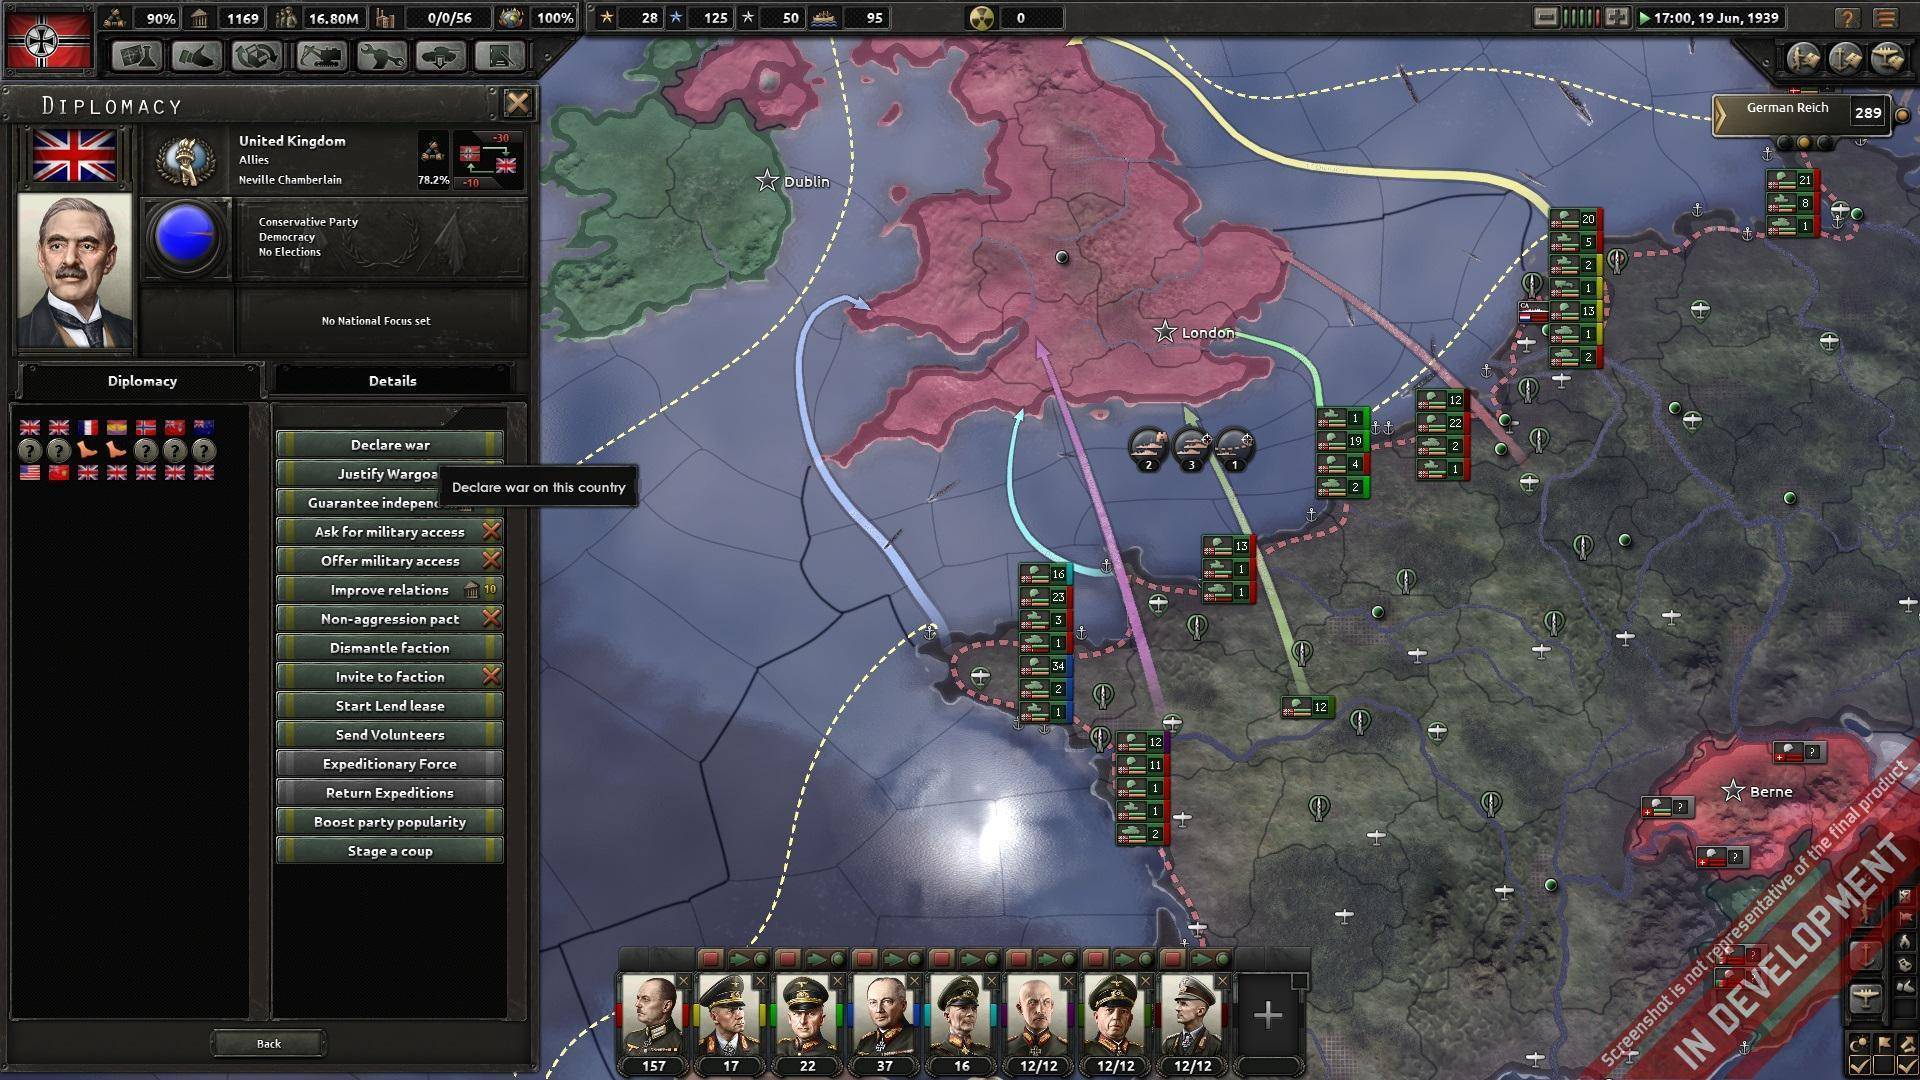 hearts of iron 4 steam free